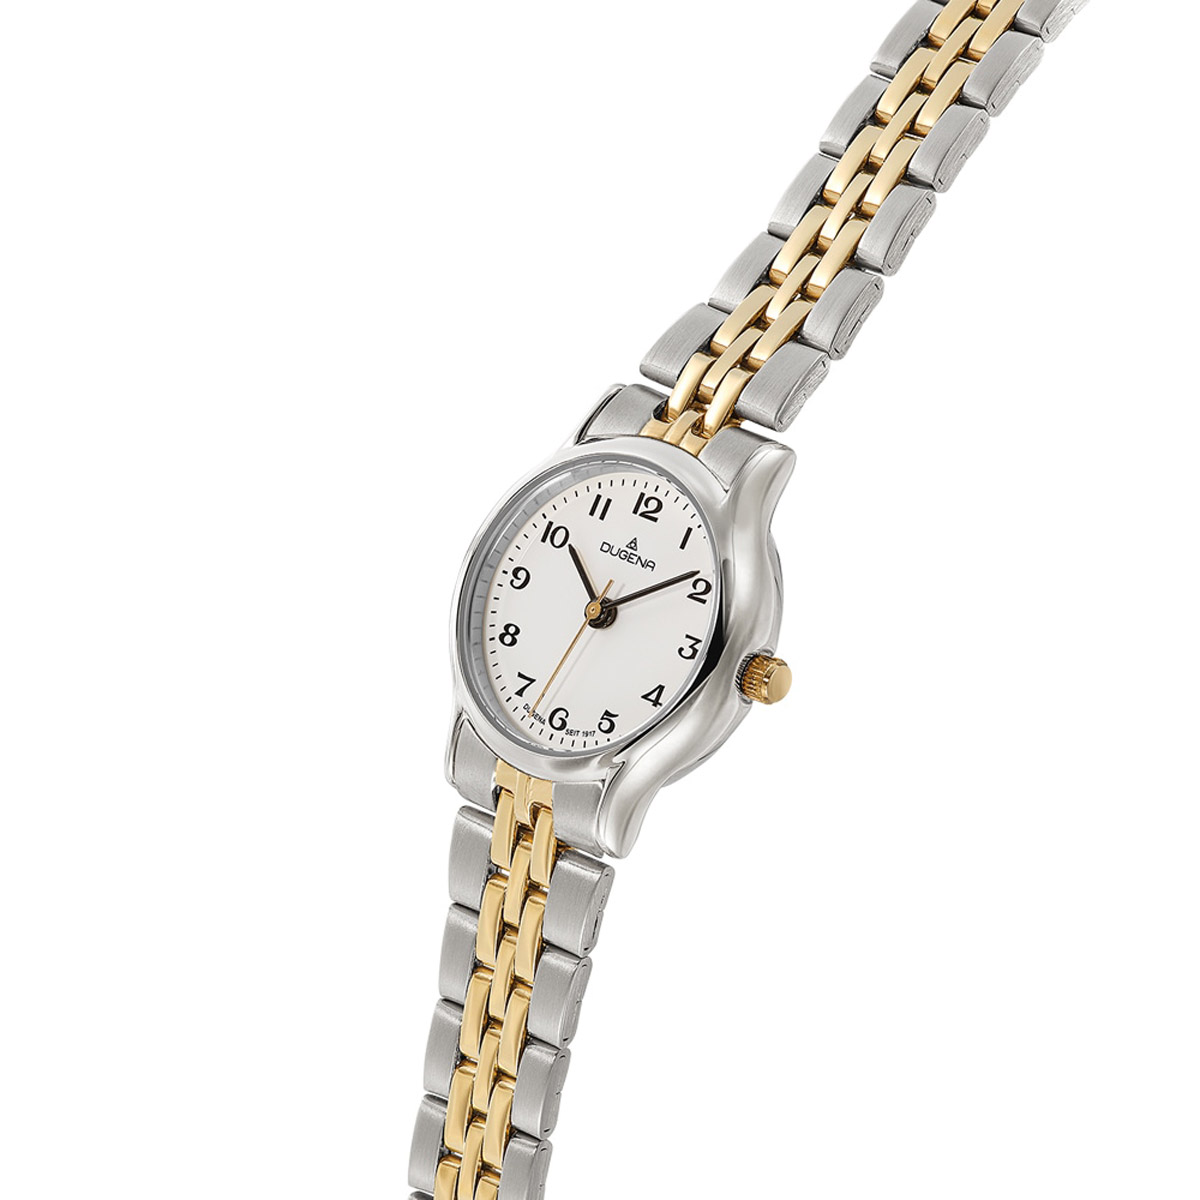 Dugena Women's Watch Vintage Stainless Steel Two-Tone 4461111 • uhrcenter